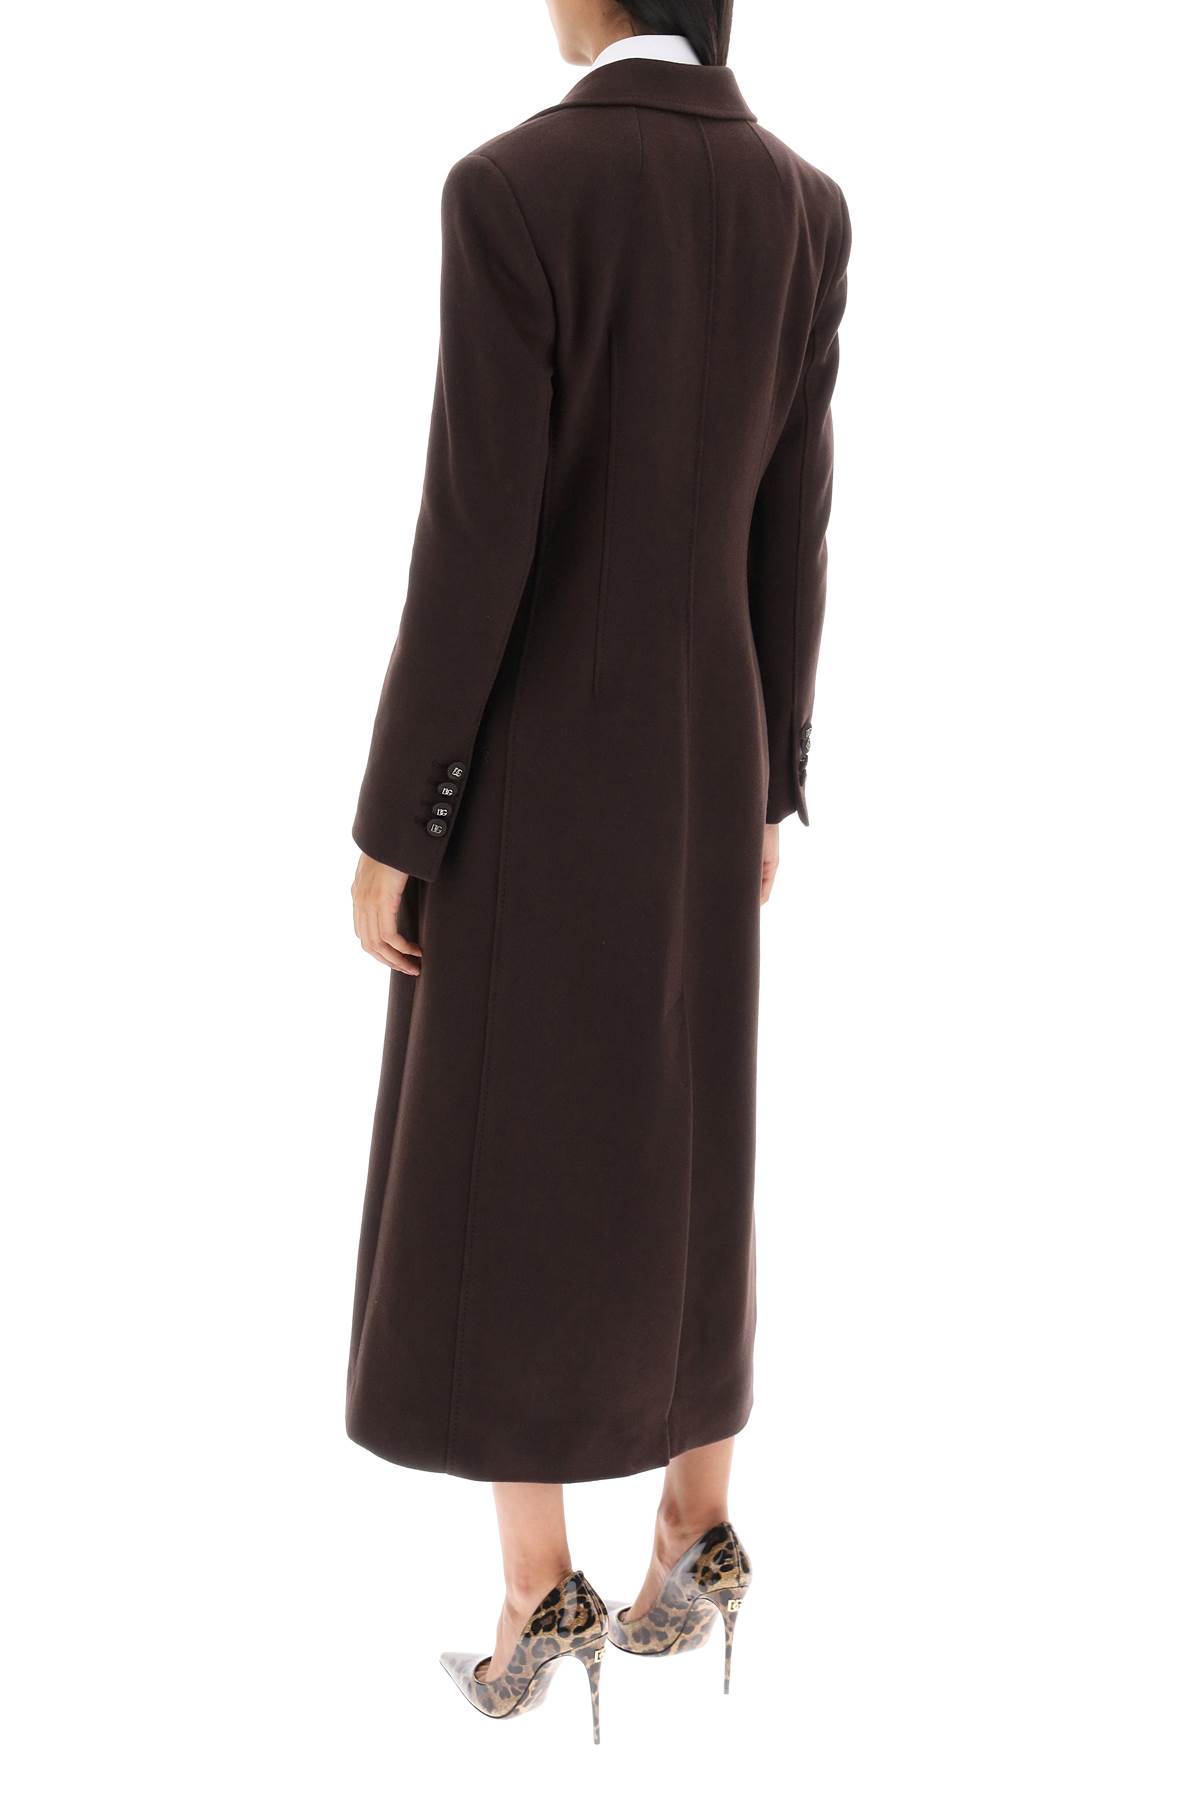 Shop Dolce & Gabbana Shaped Coat In Wool And Cashmere In Marrone Scuro 4 (brown)